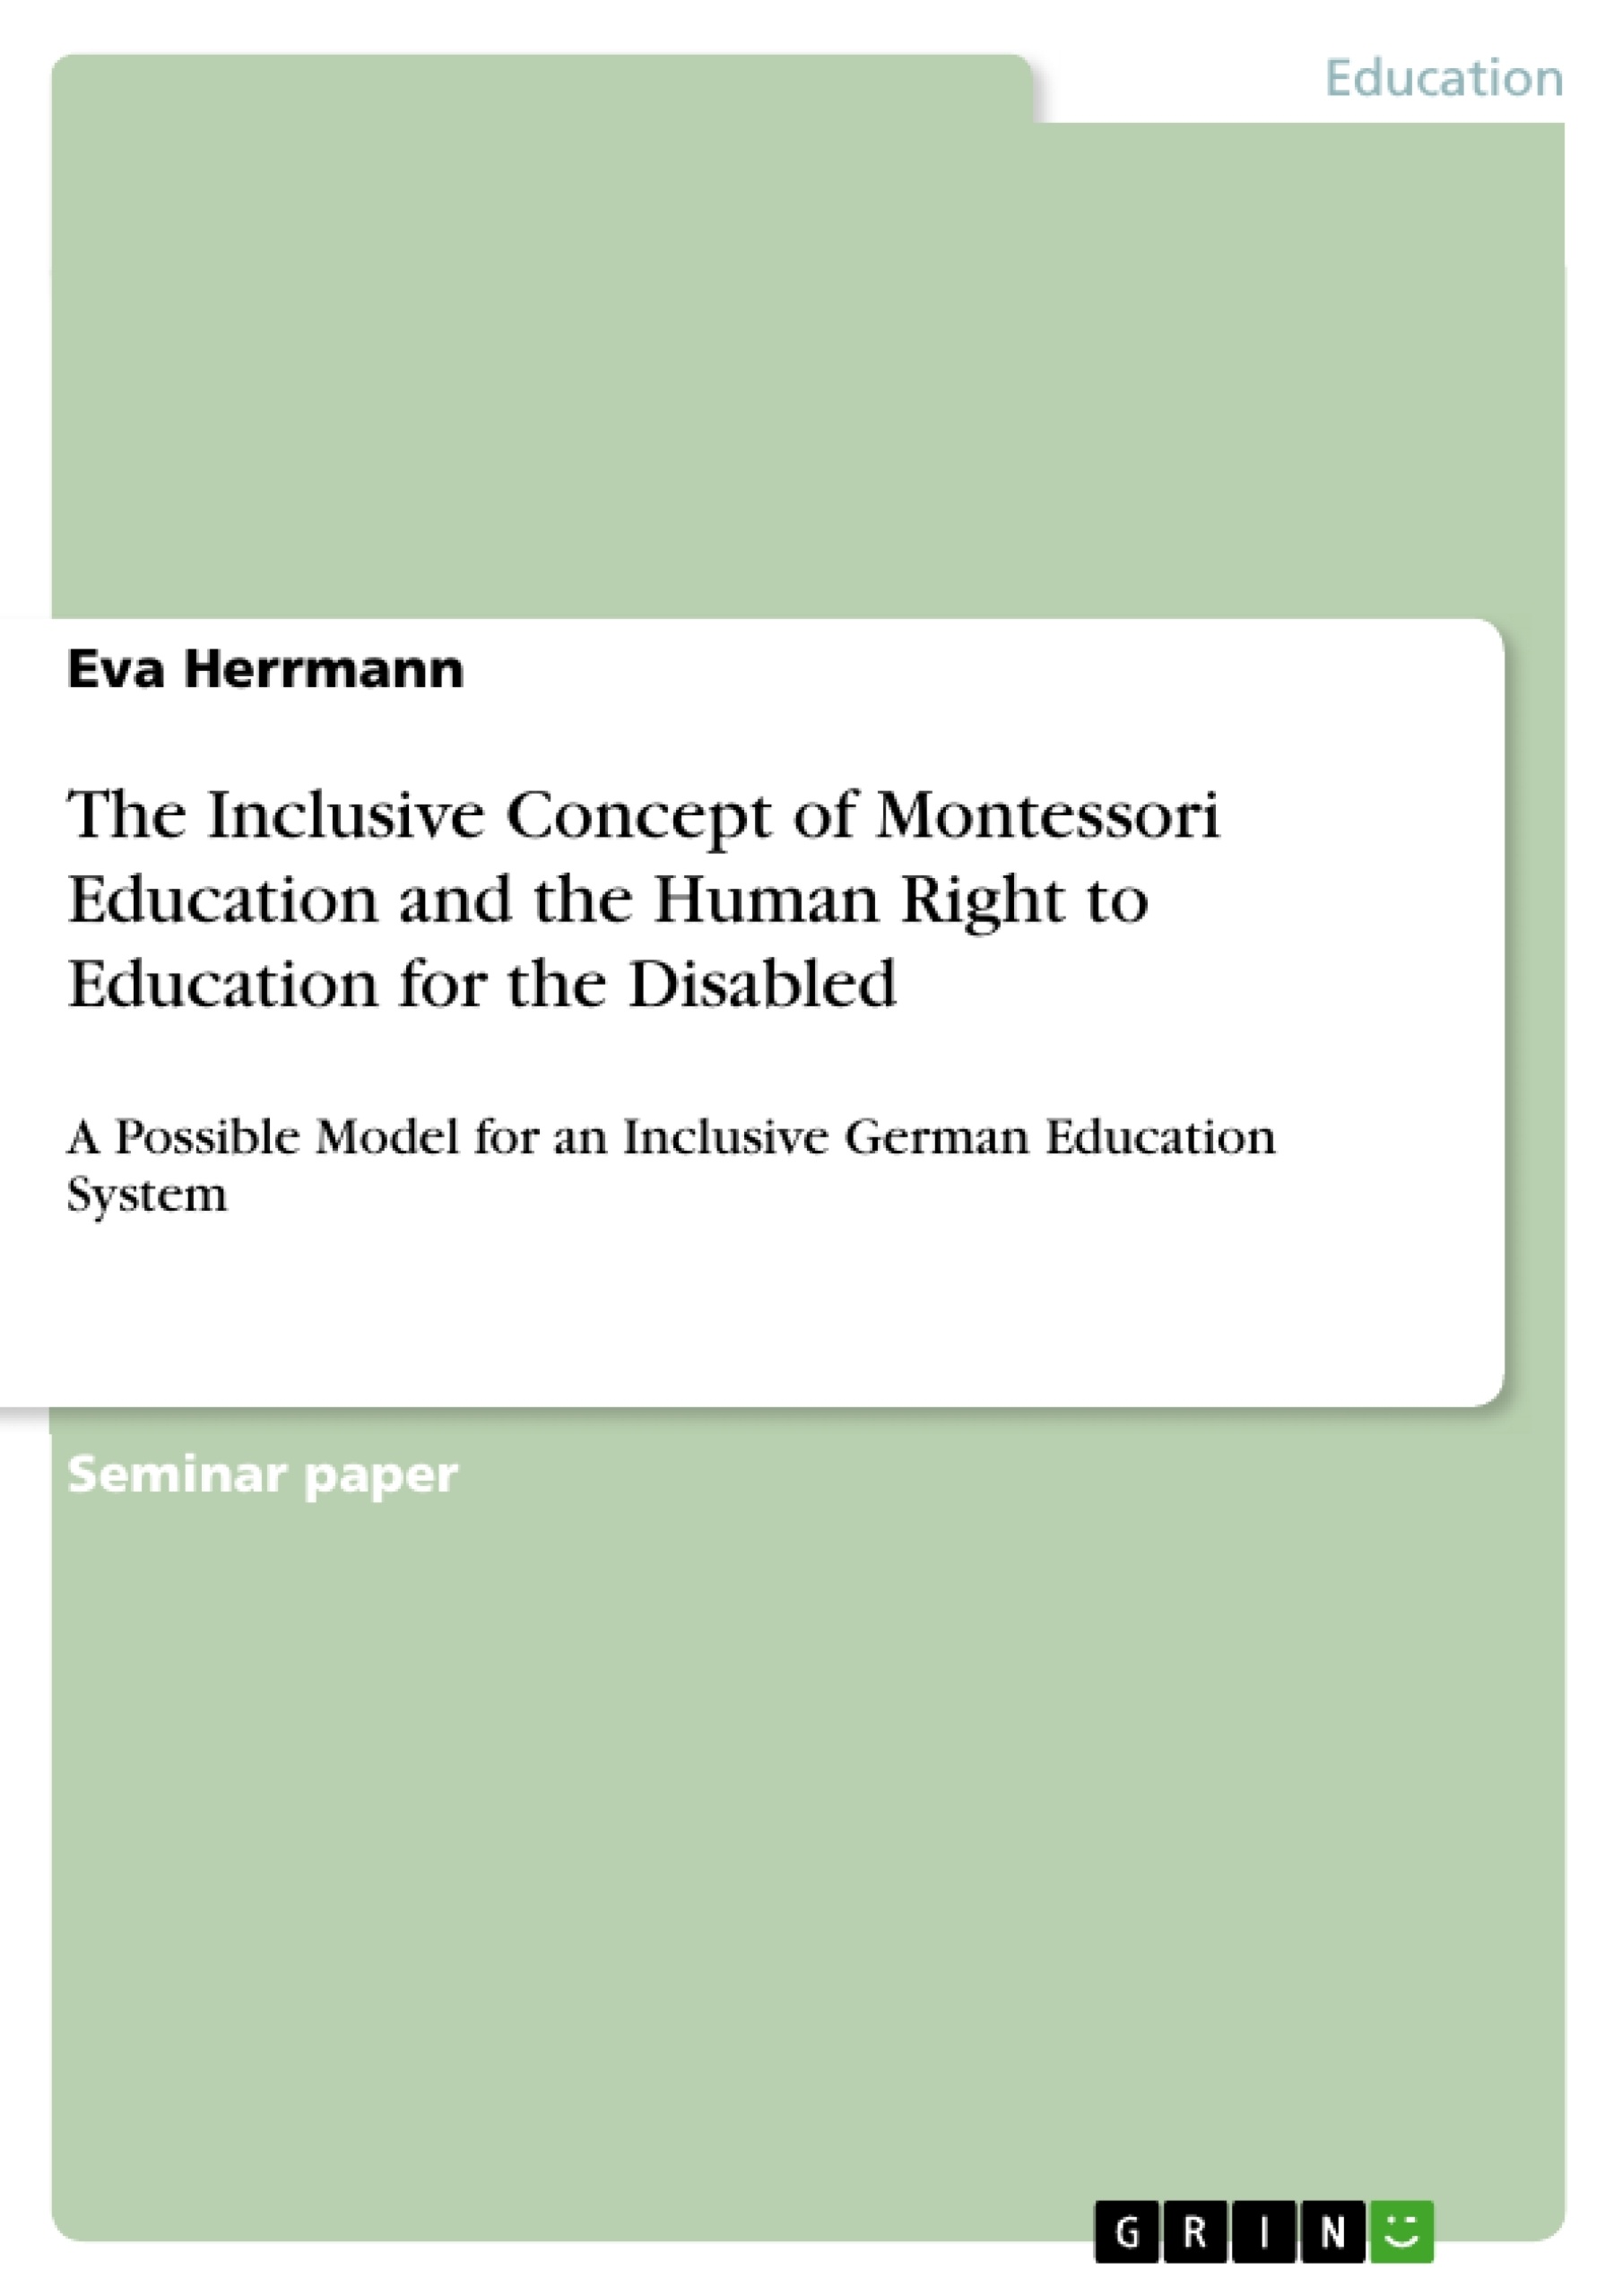 Title: The Inclusive Concept of Montessori Education and the Human Right to Education for the Disabled